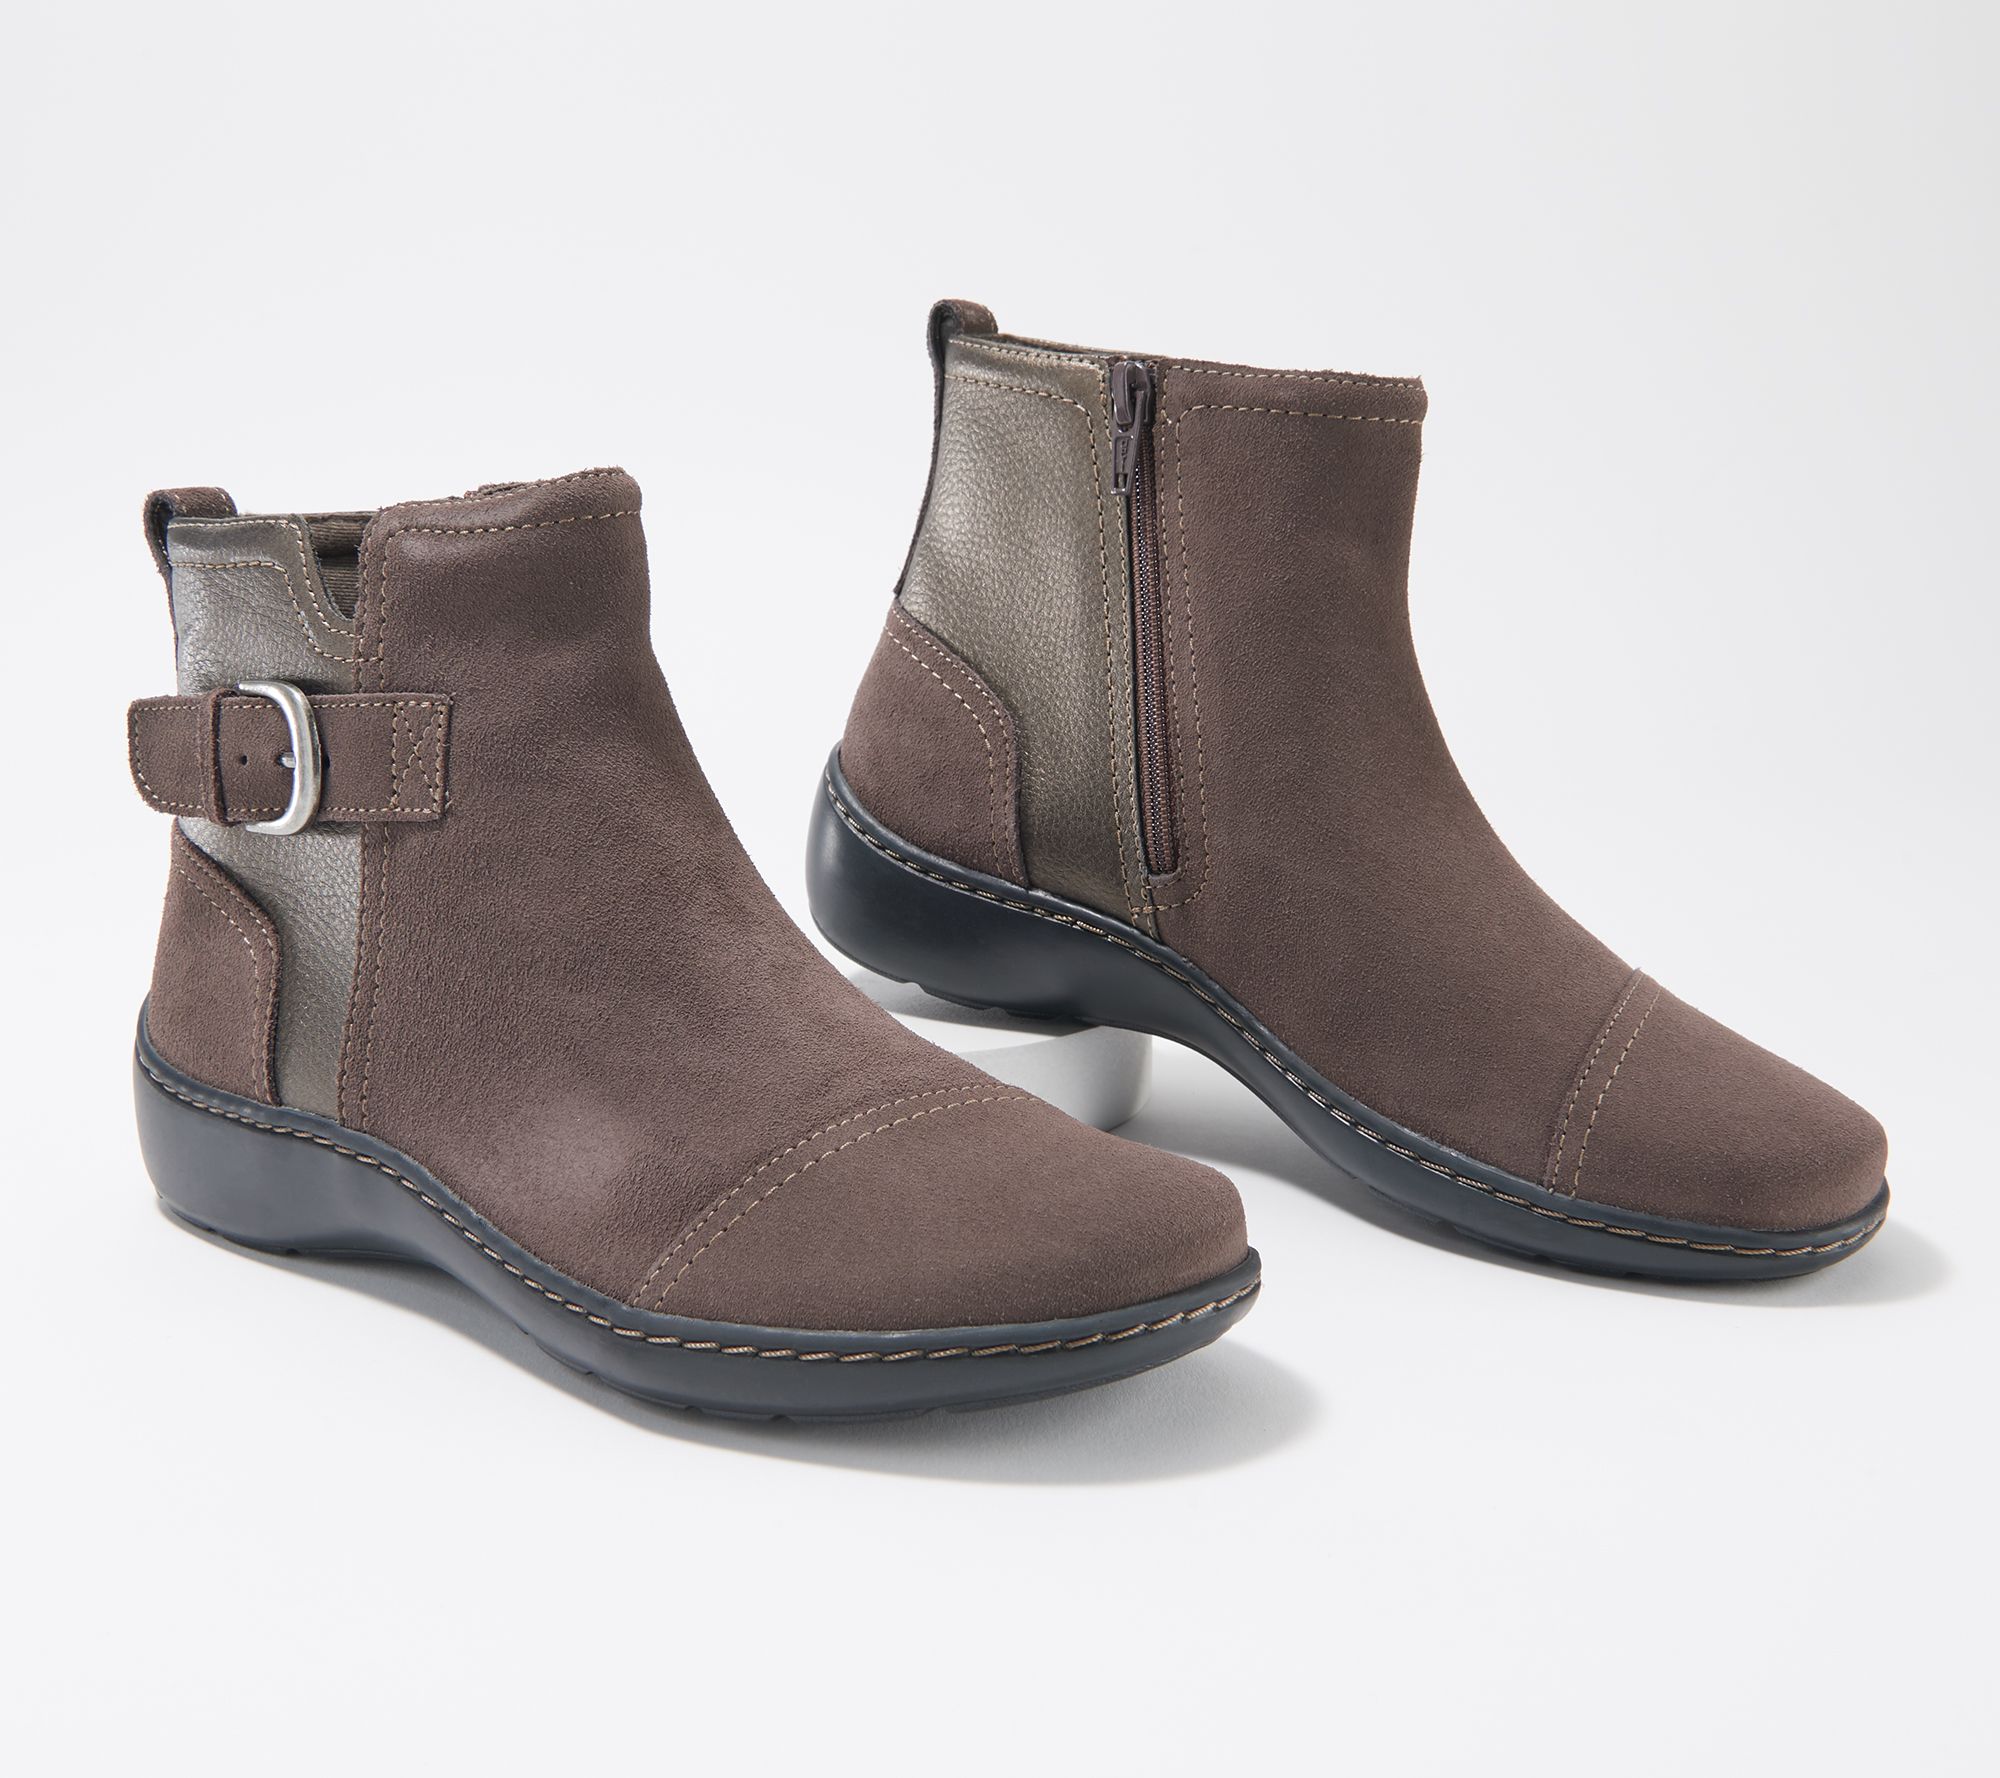 clarks water resistant suede ankle boots